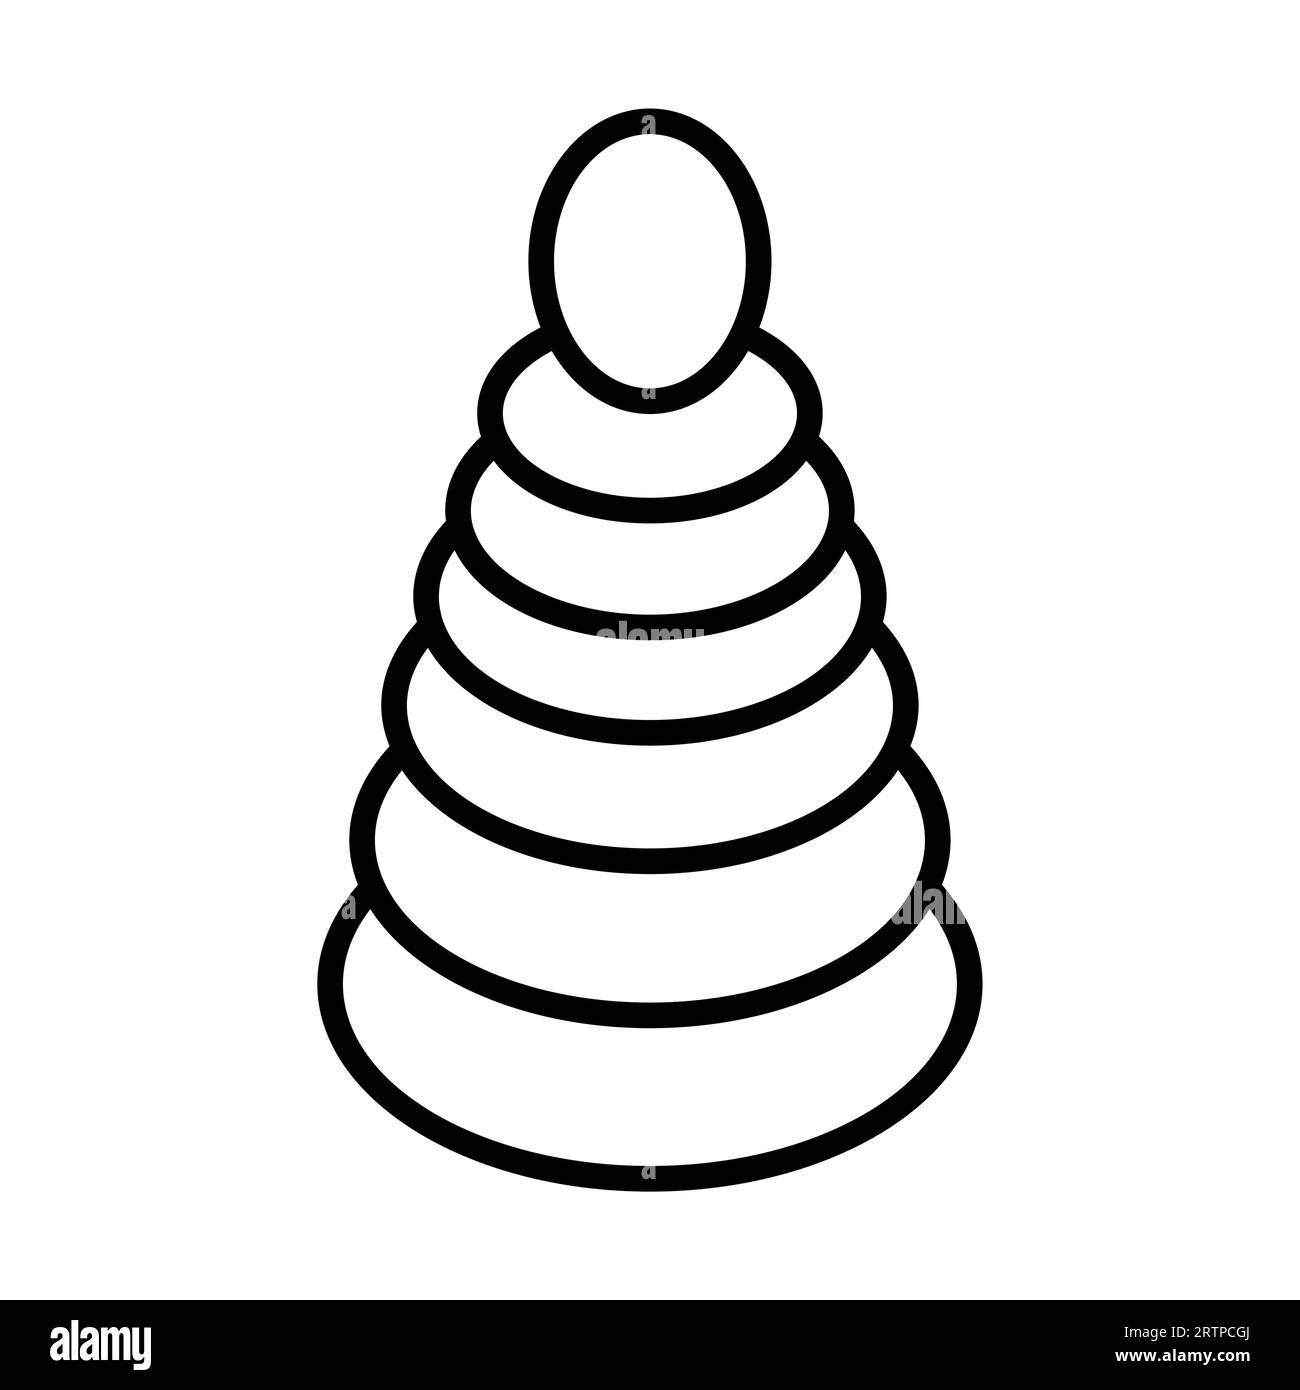 Simple outline of wooden pyramid vector icon Stock Vector